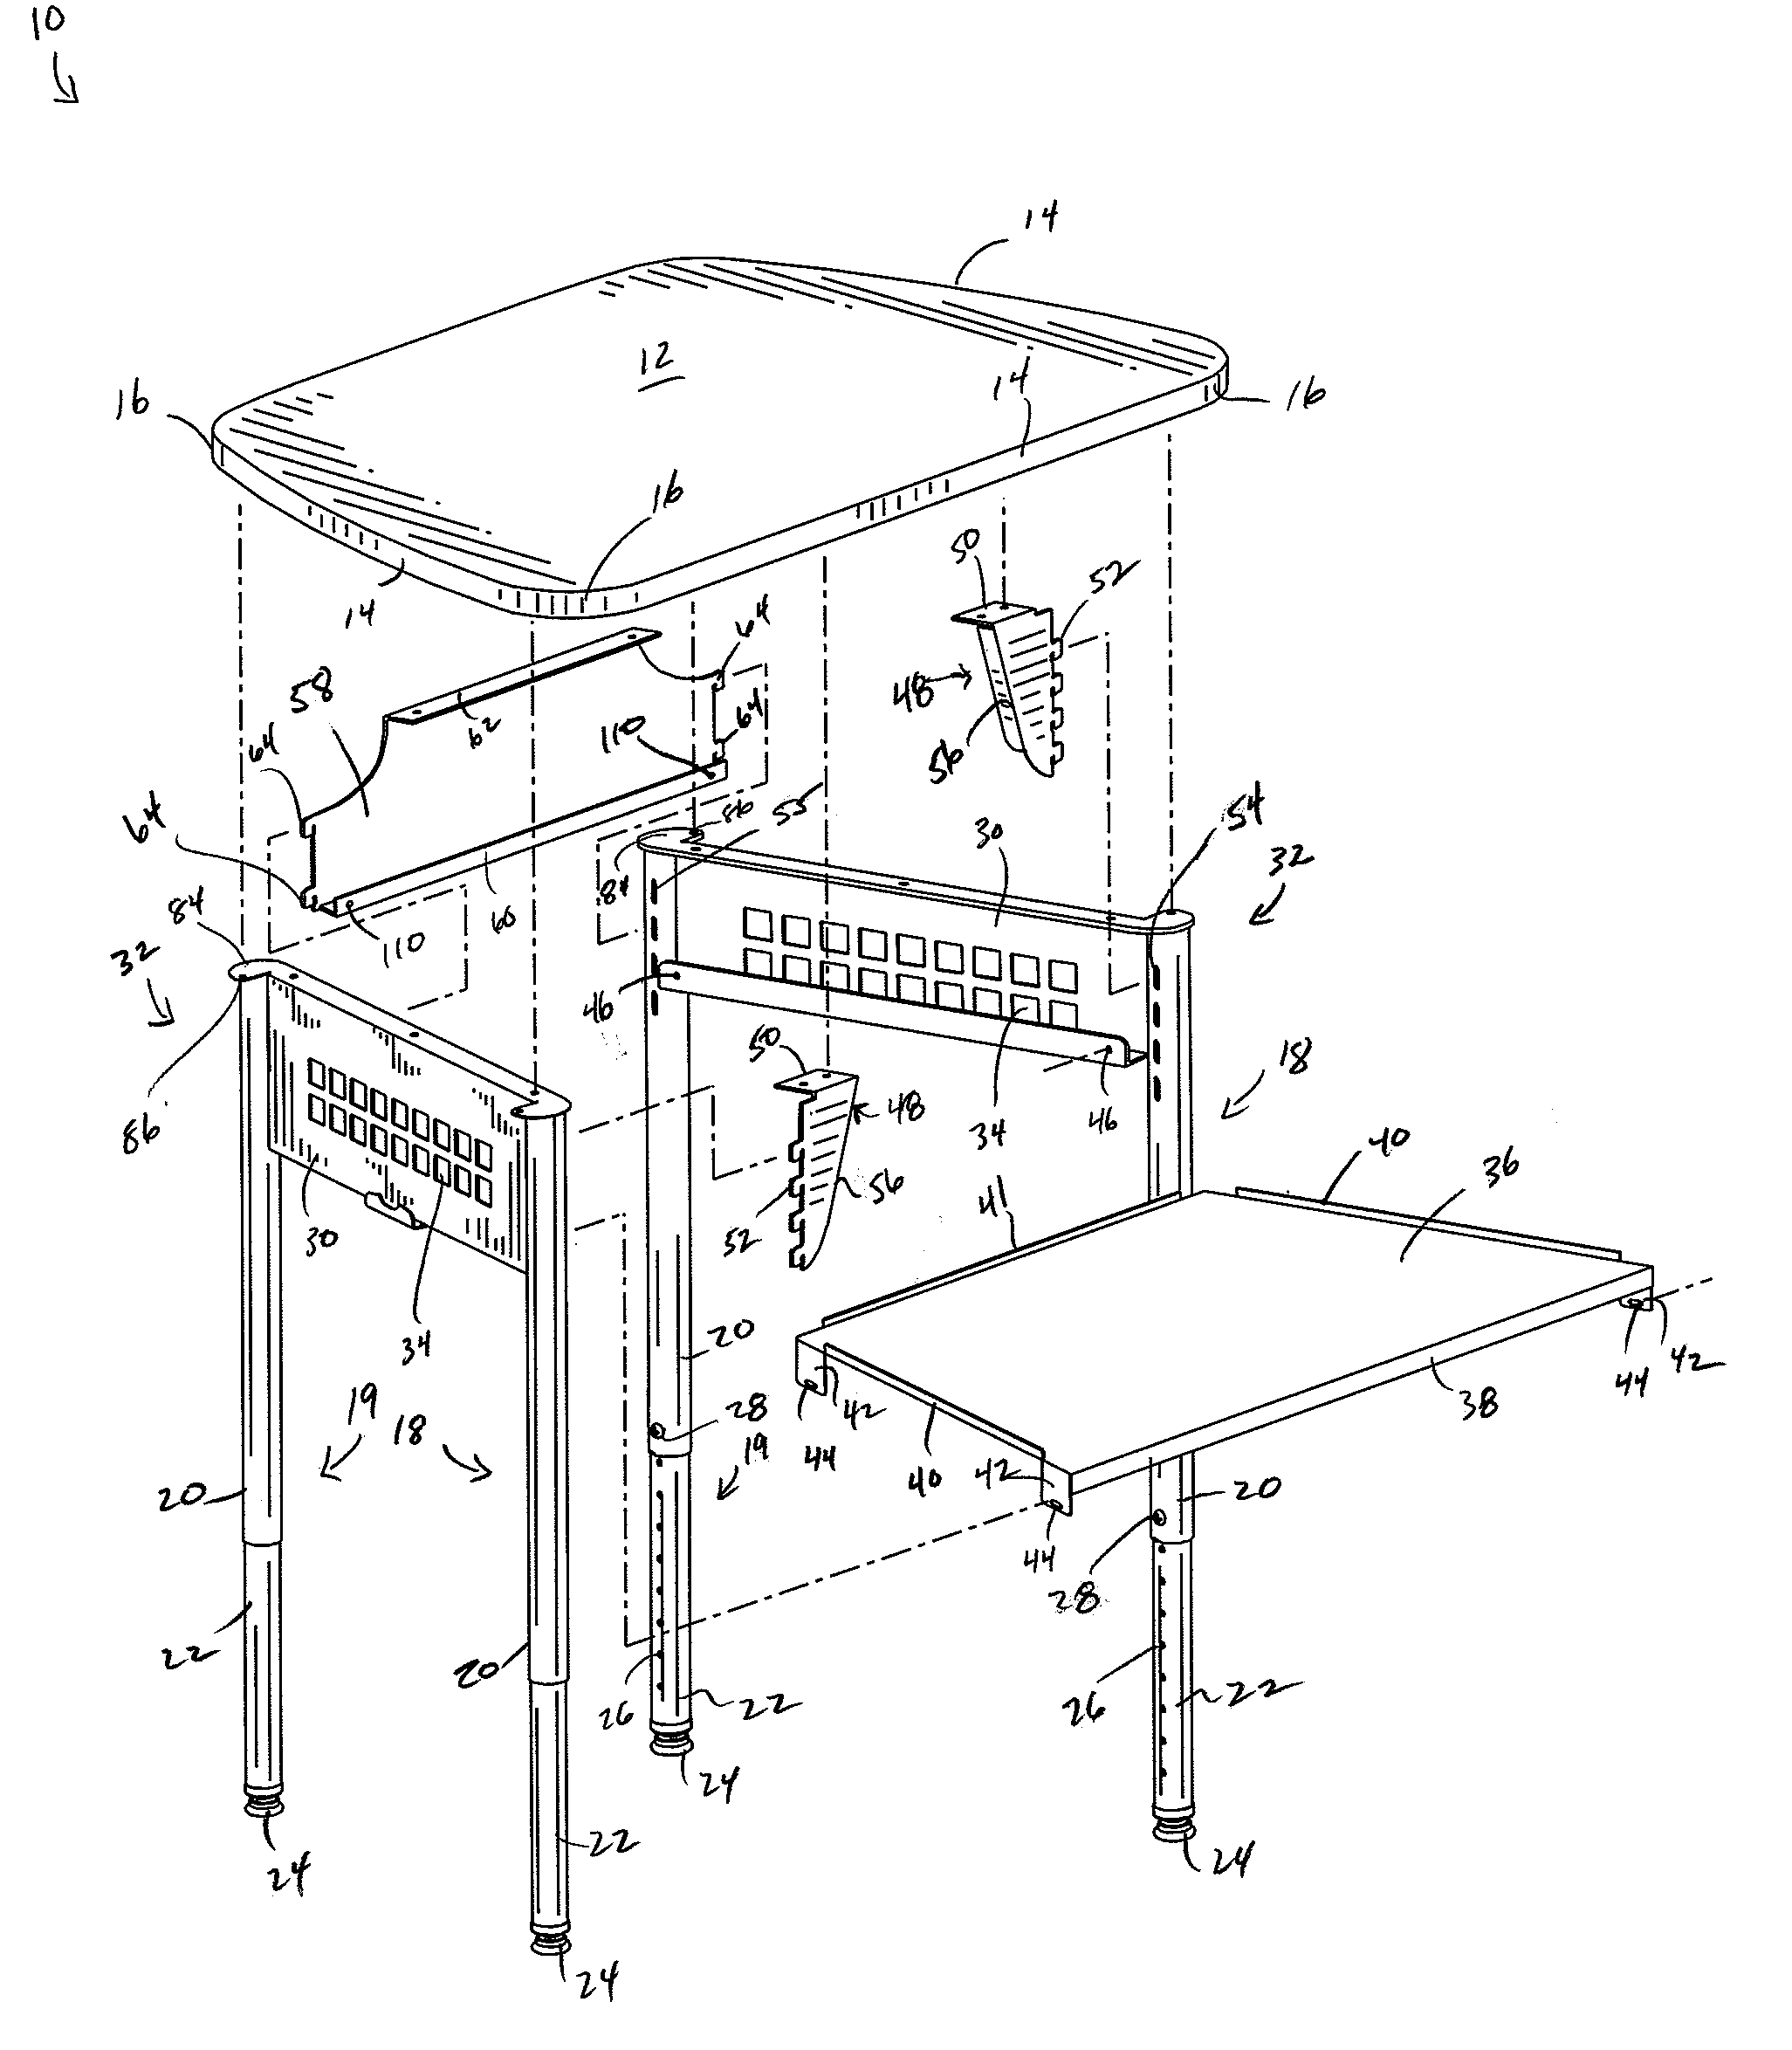 Variable Configuration Desk Having Worksurface Locking Feature